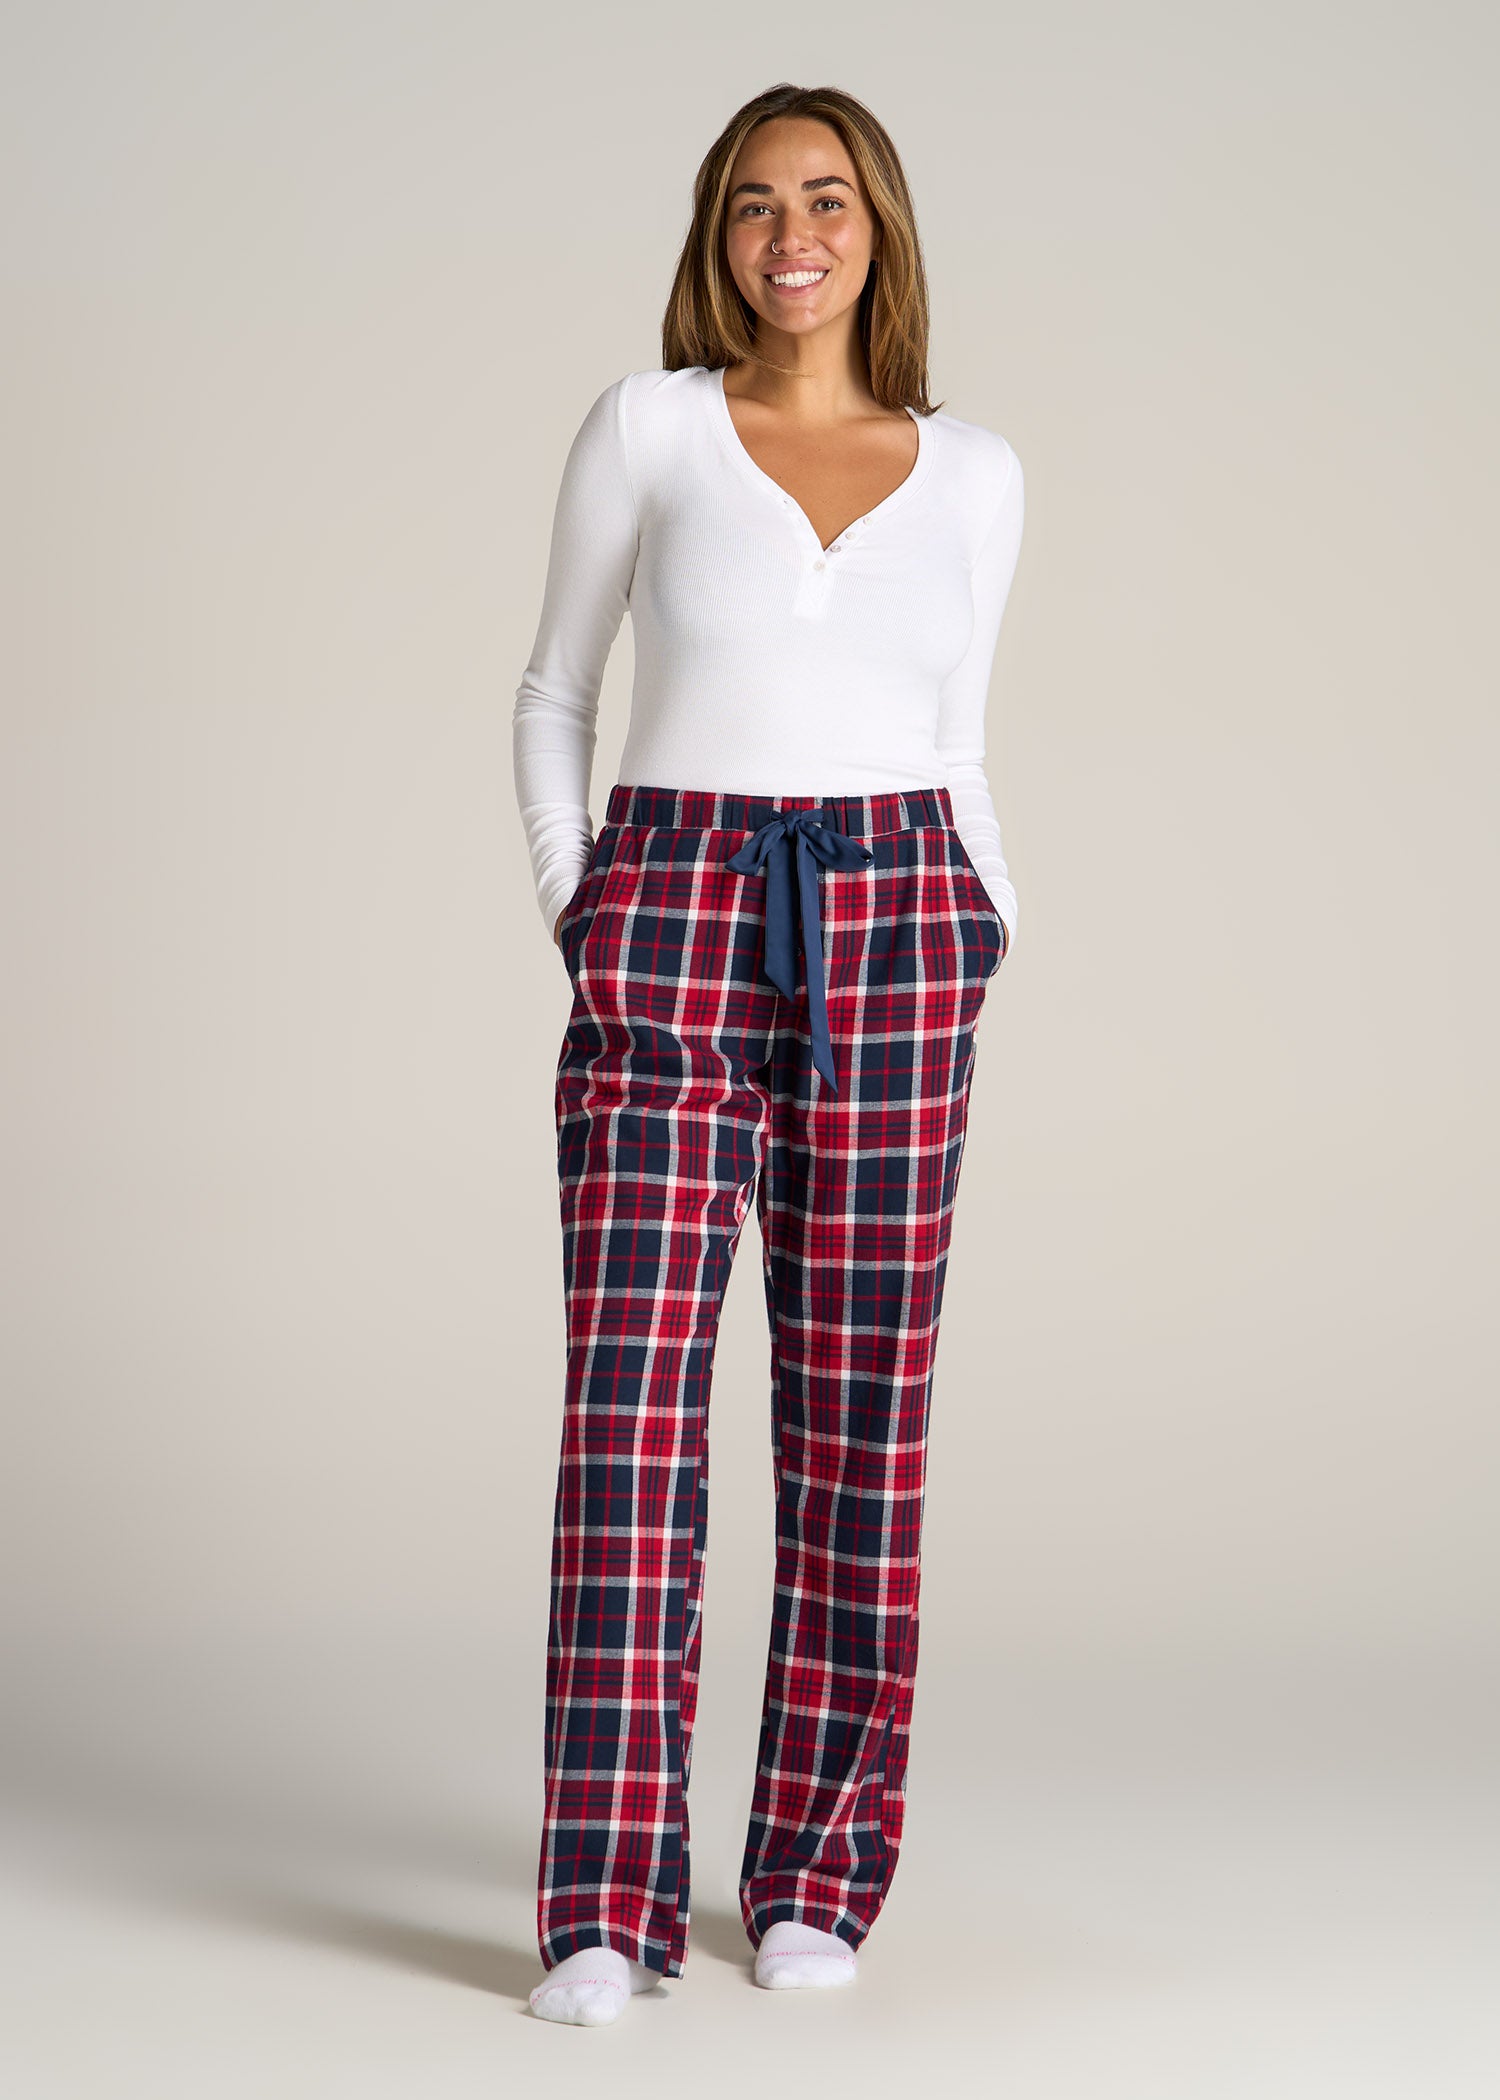 Open-Bottom Waffle Lounge Pants for Tall Women in Midnight Blue